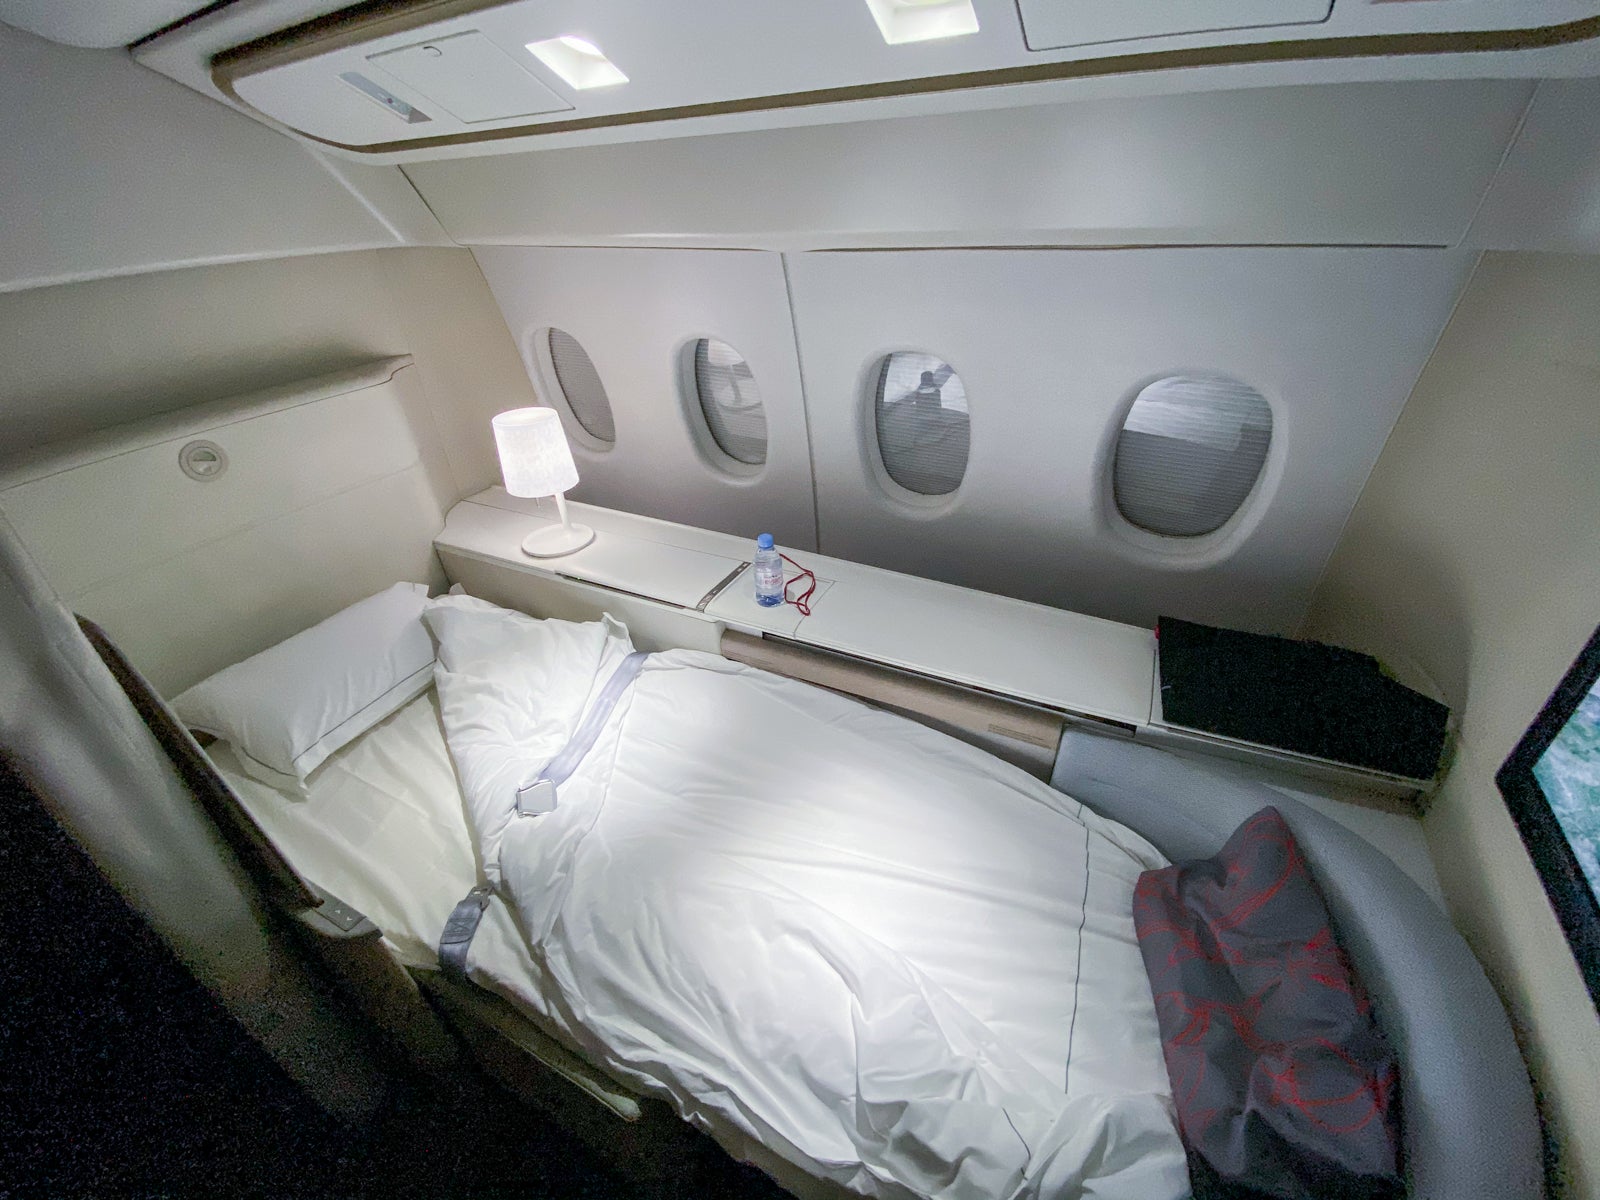 Review Air France La Première First Class on the Boeing 777-300ER